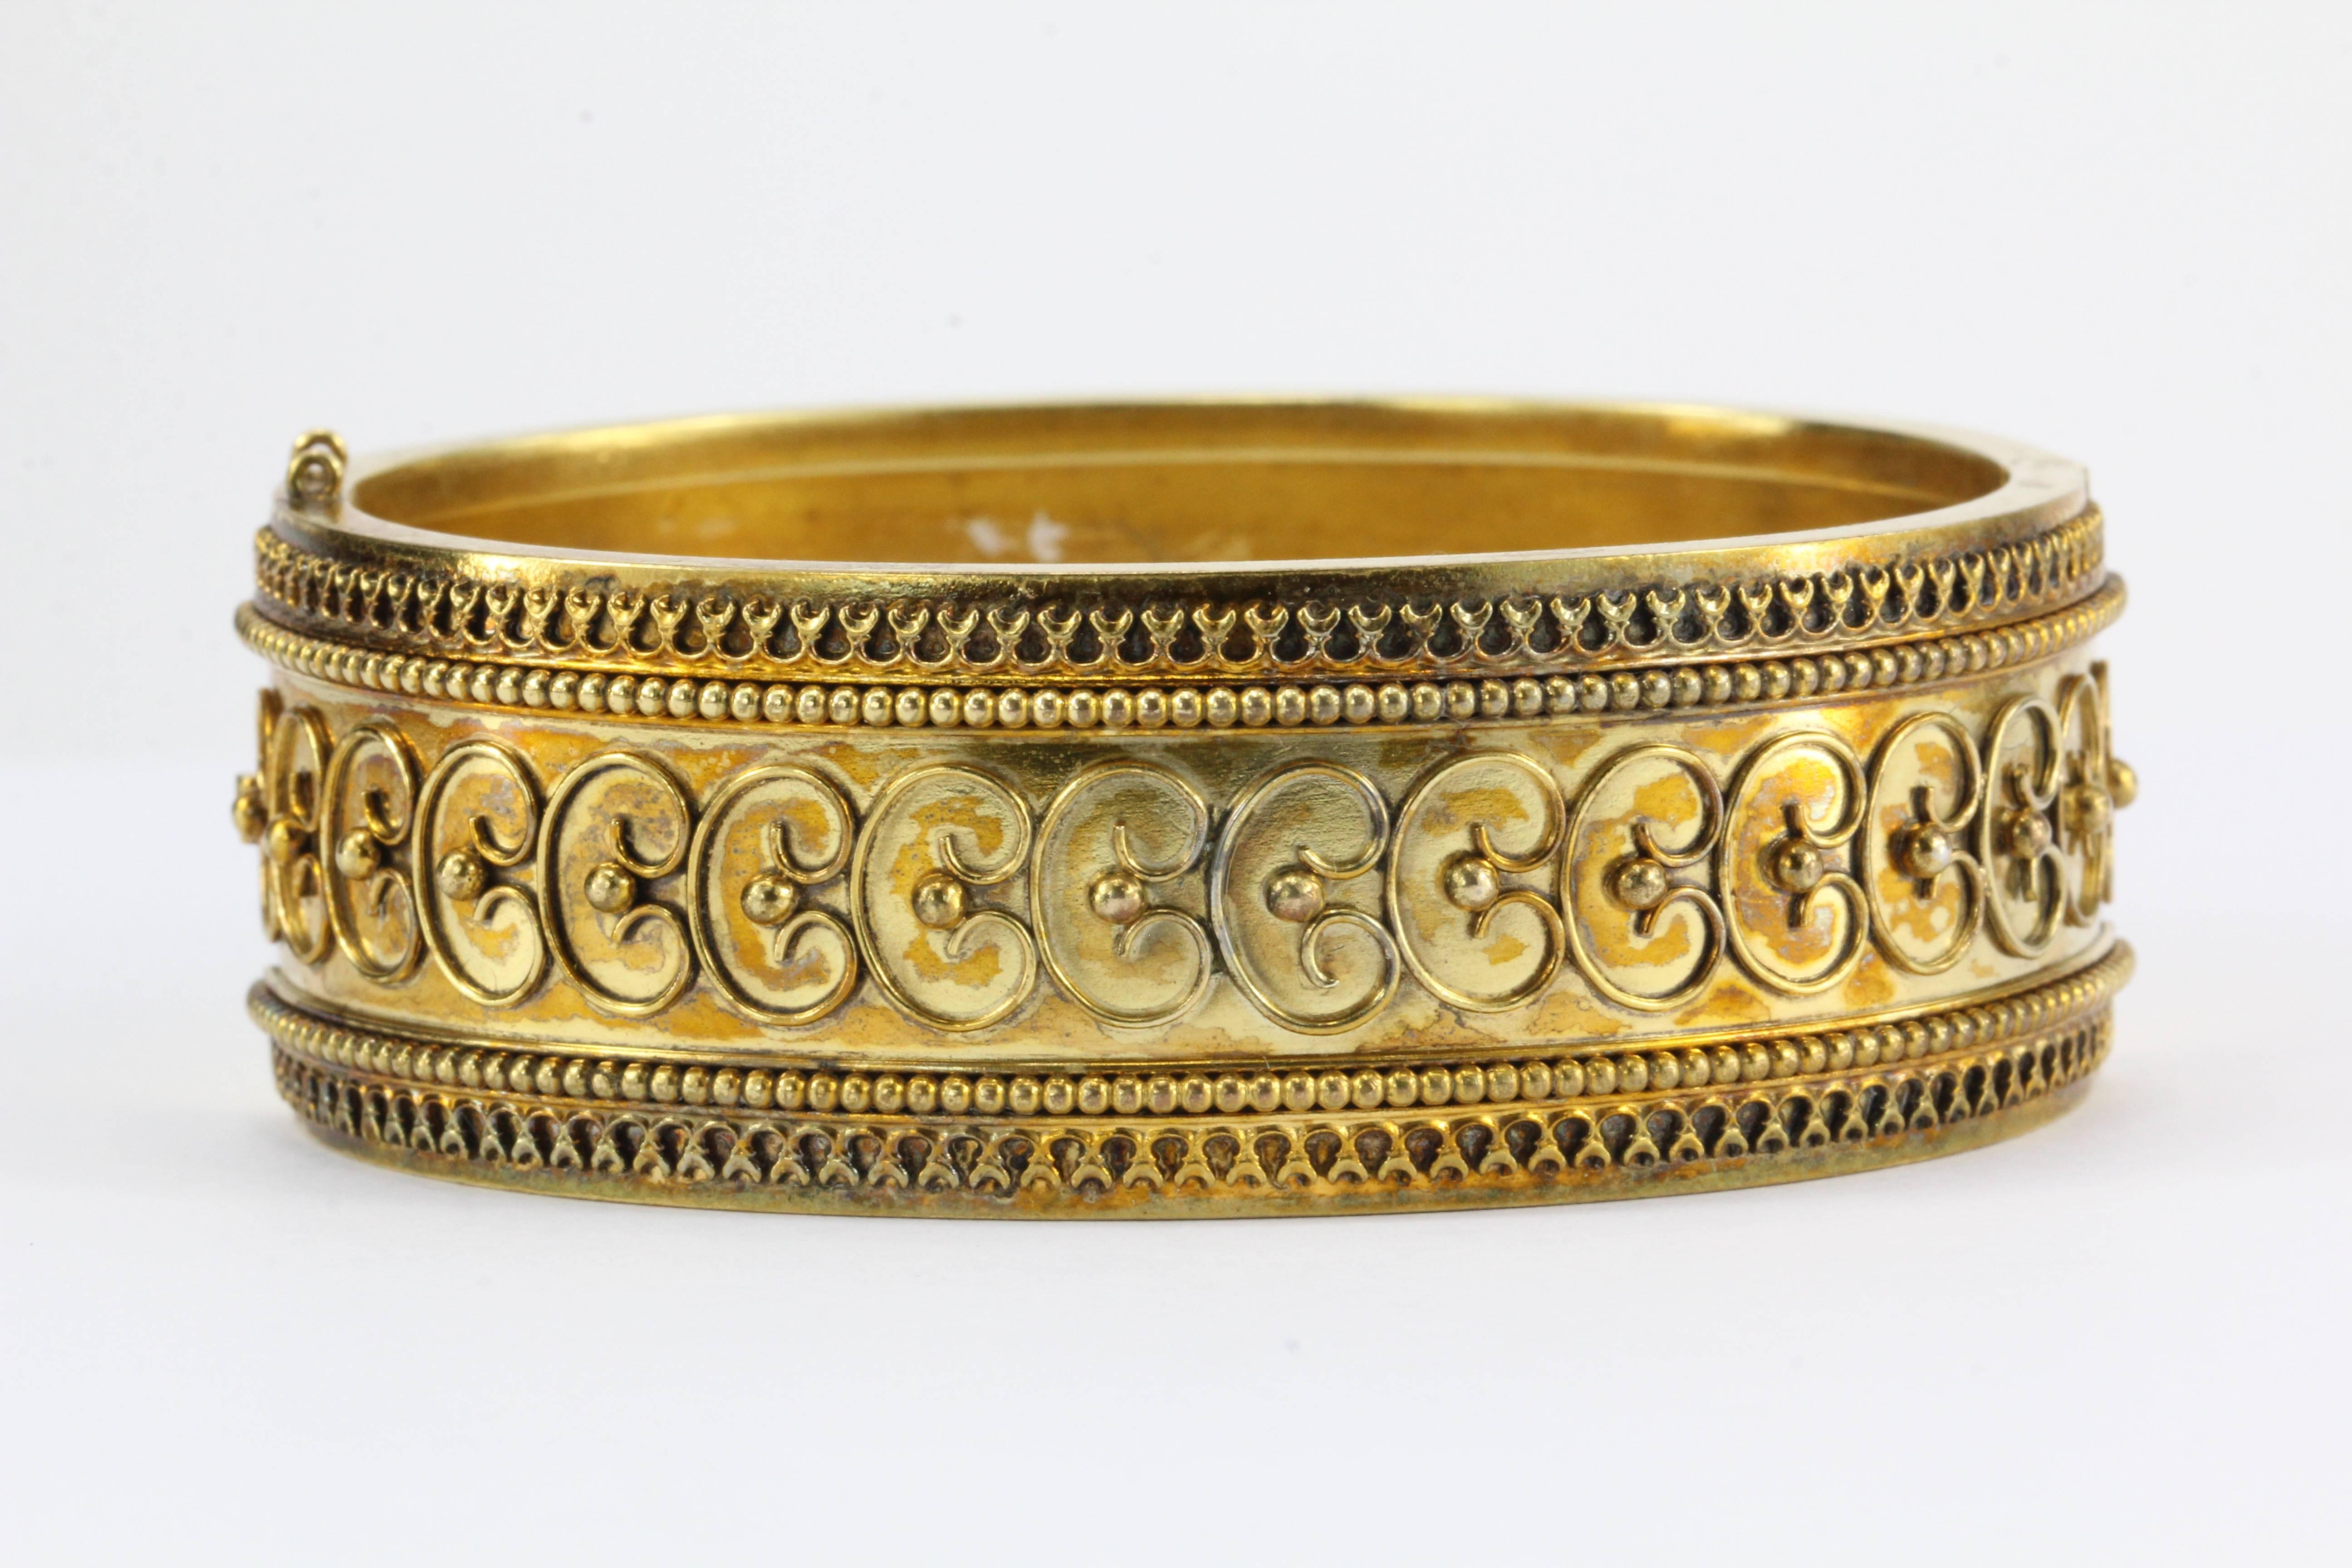 Lovely 15K Yellow Gold Victorian Era Etruscan Revival Bangle in Original Fitted Case from A. Mears 50 Strand London

c.1880

The bangle weighs 31 grams

Measures 23mm wide

56mm inner diameter x 46mm inner diameter